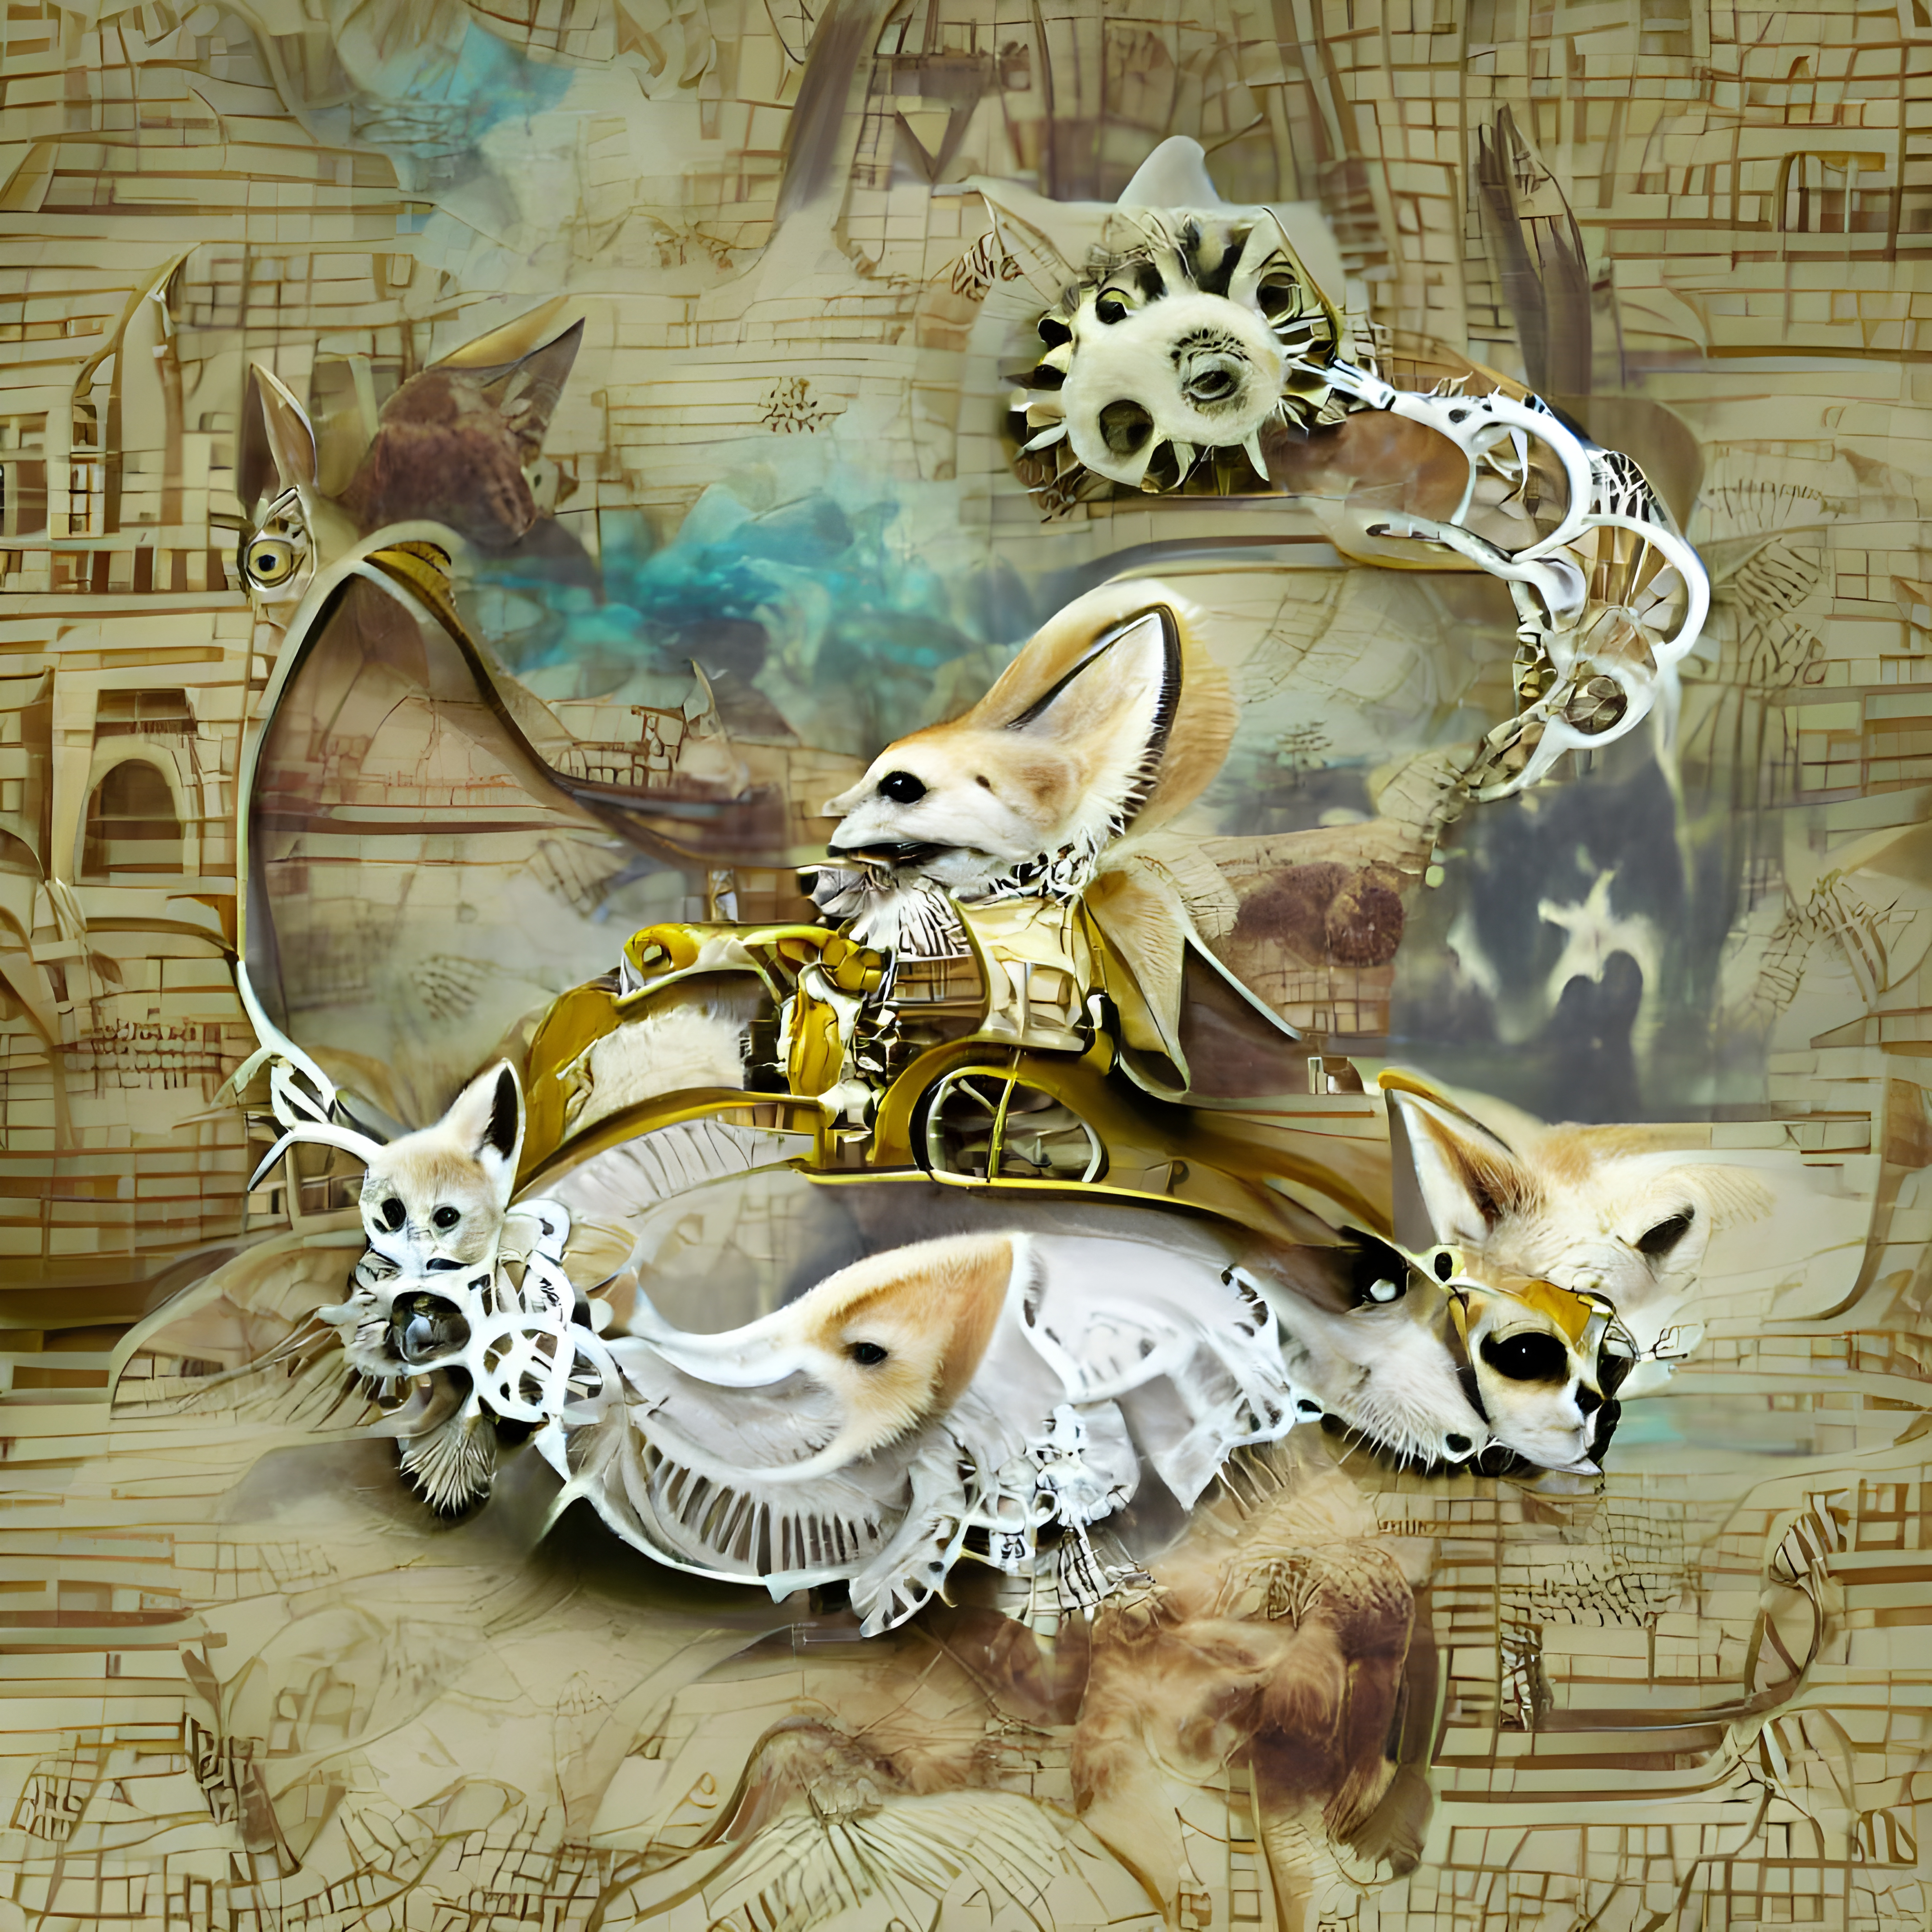 The Fennec Foxes